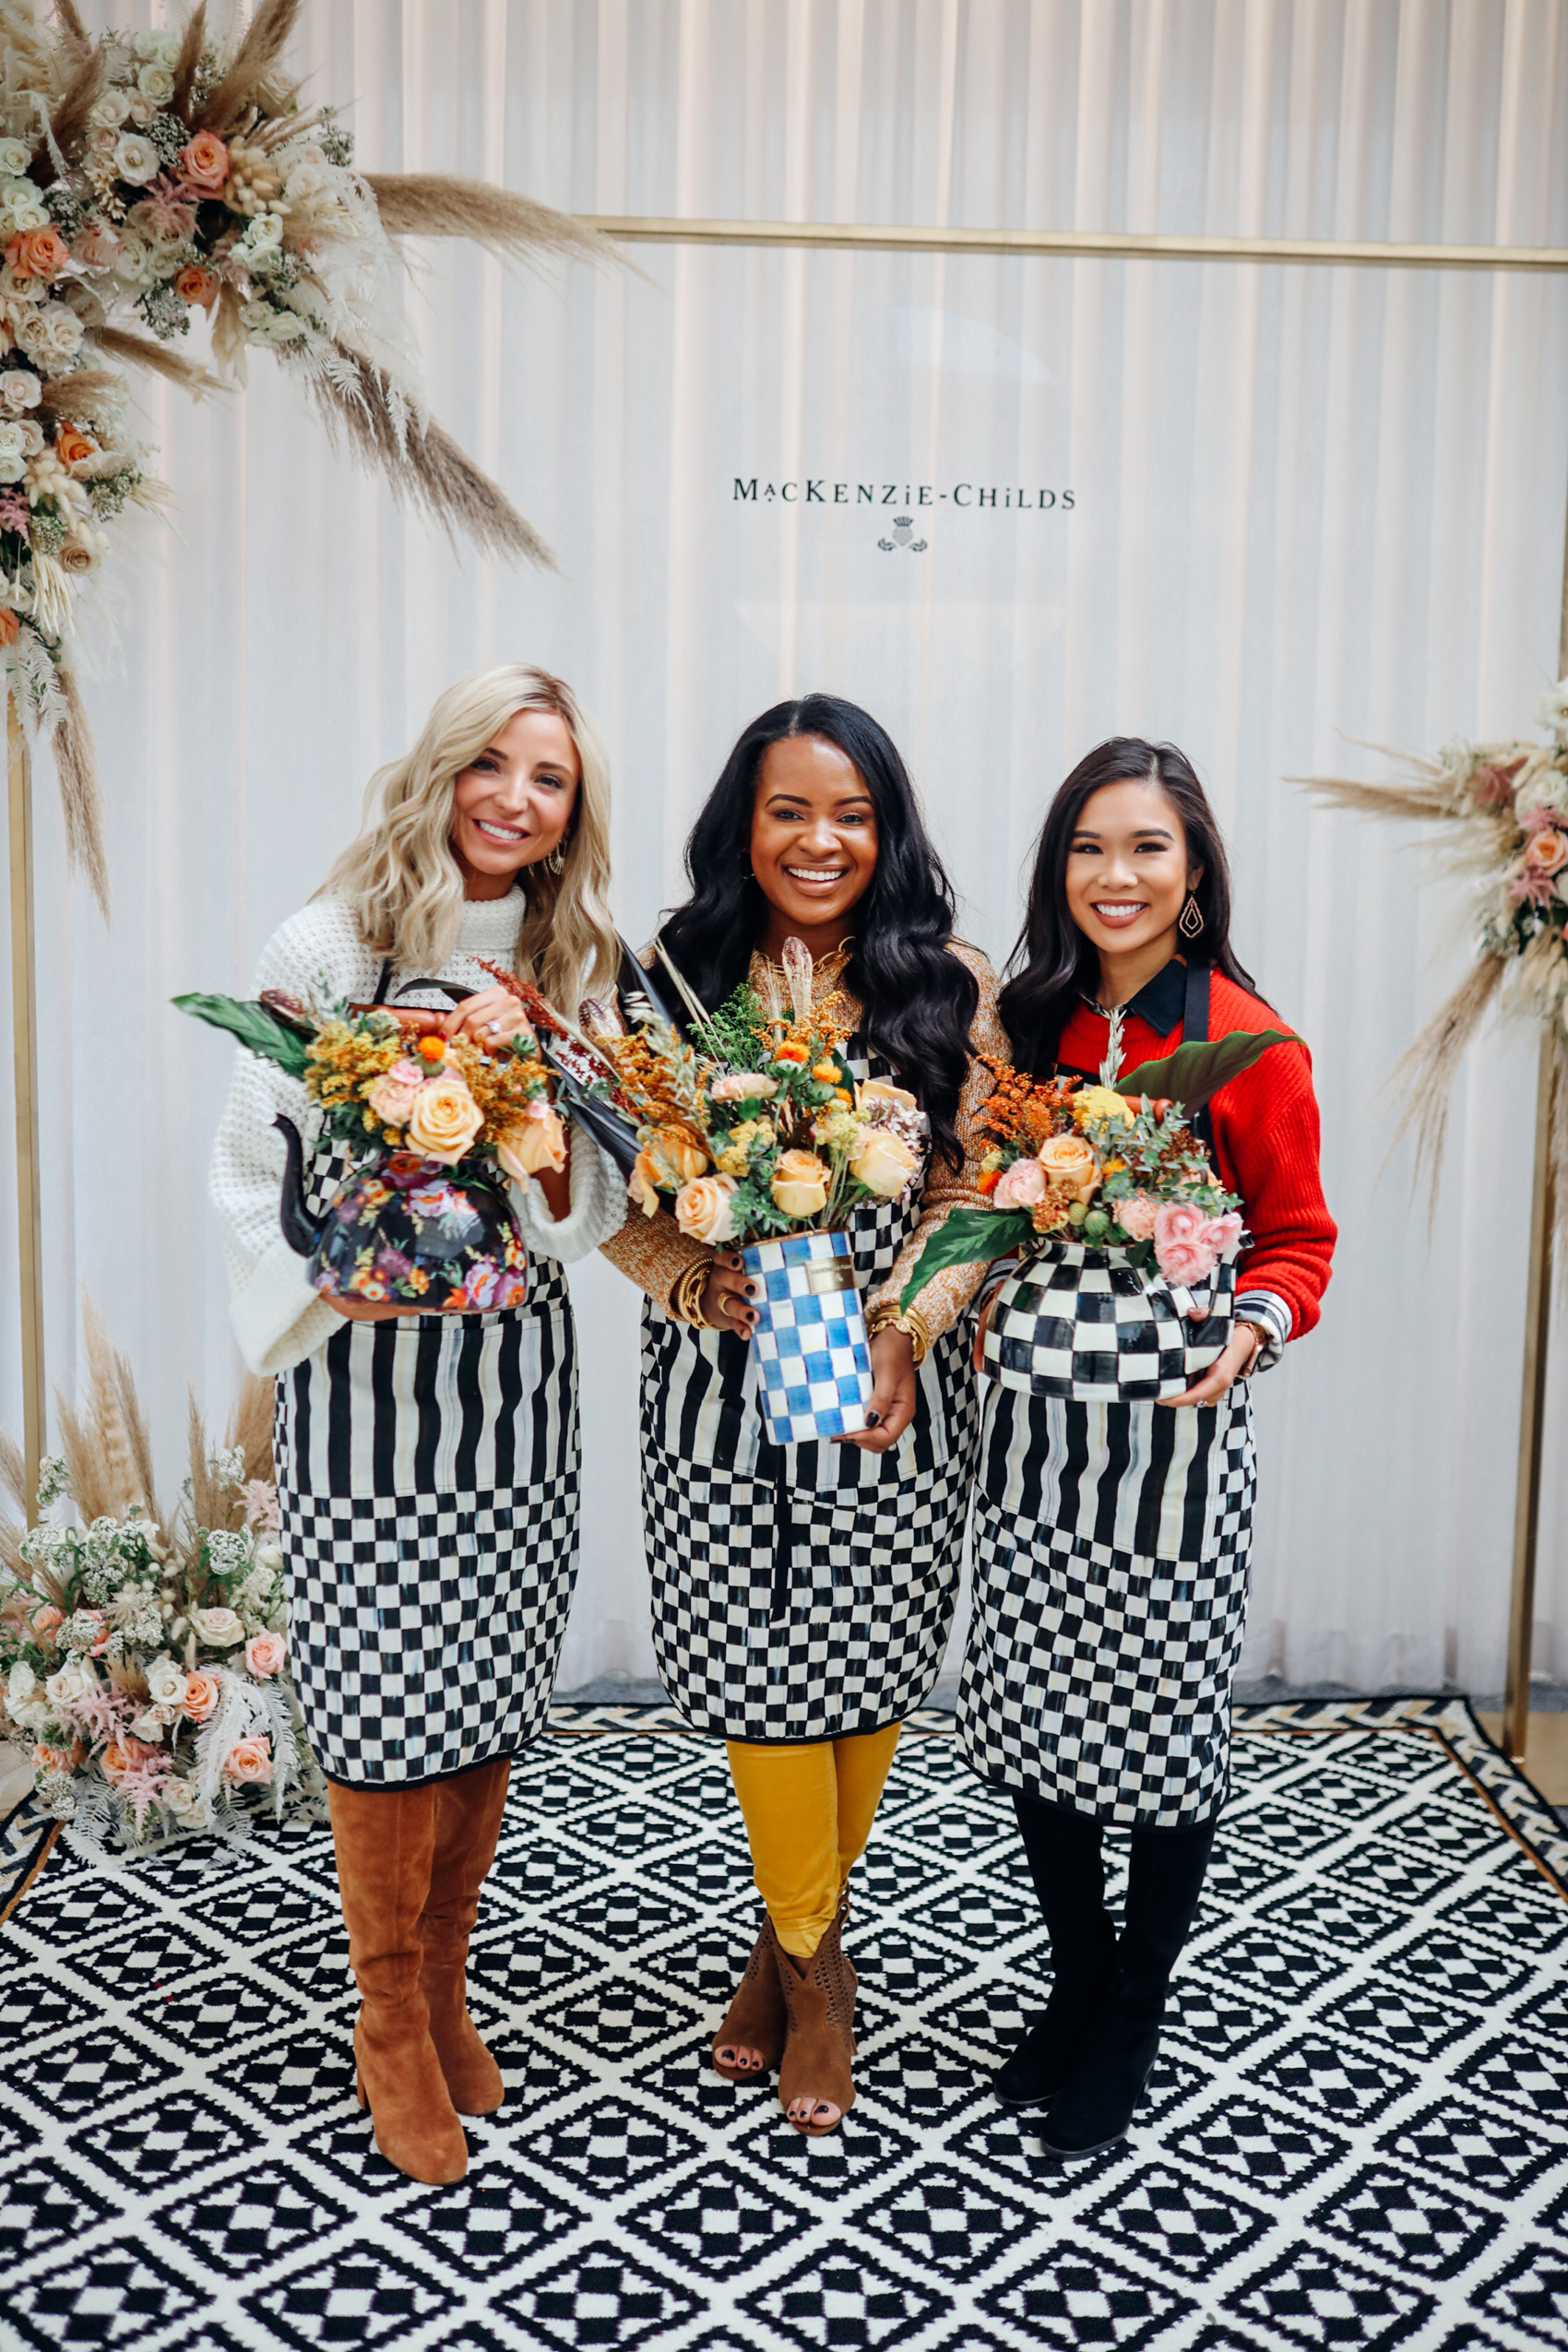 MacKenzie-Childs takes Dallas event with bloggers Hoang-Kim Cung, Taryn Newton and Dani Austin